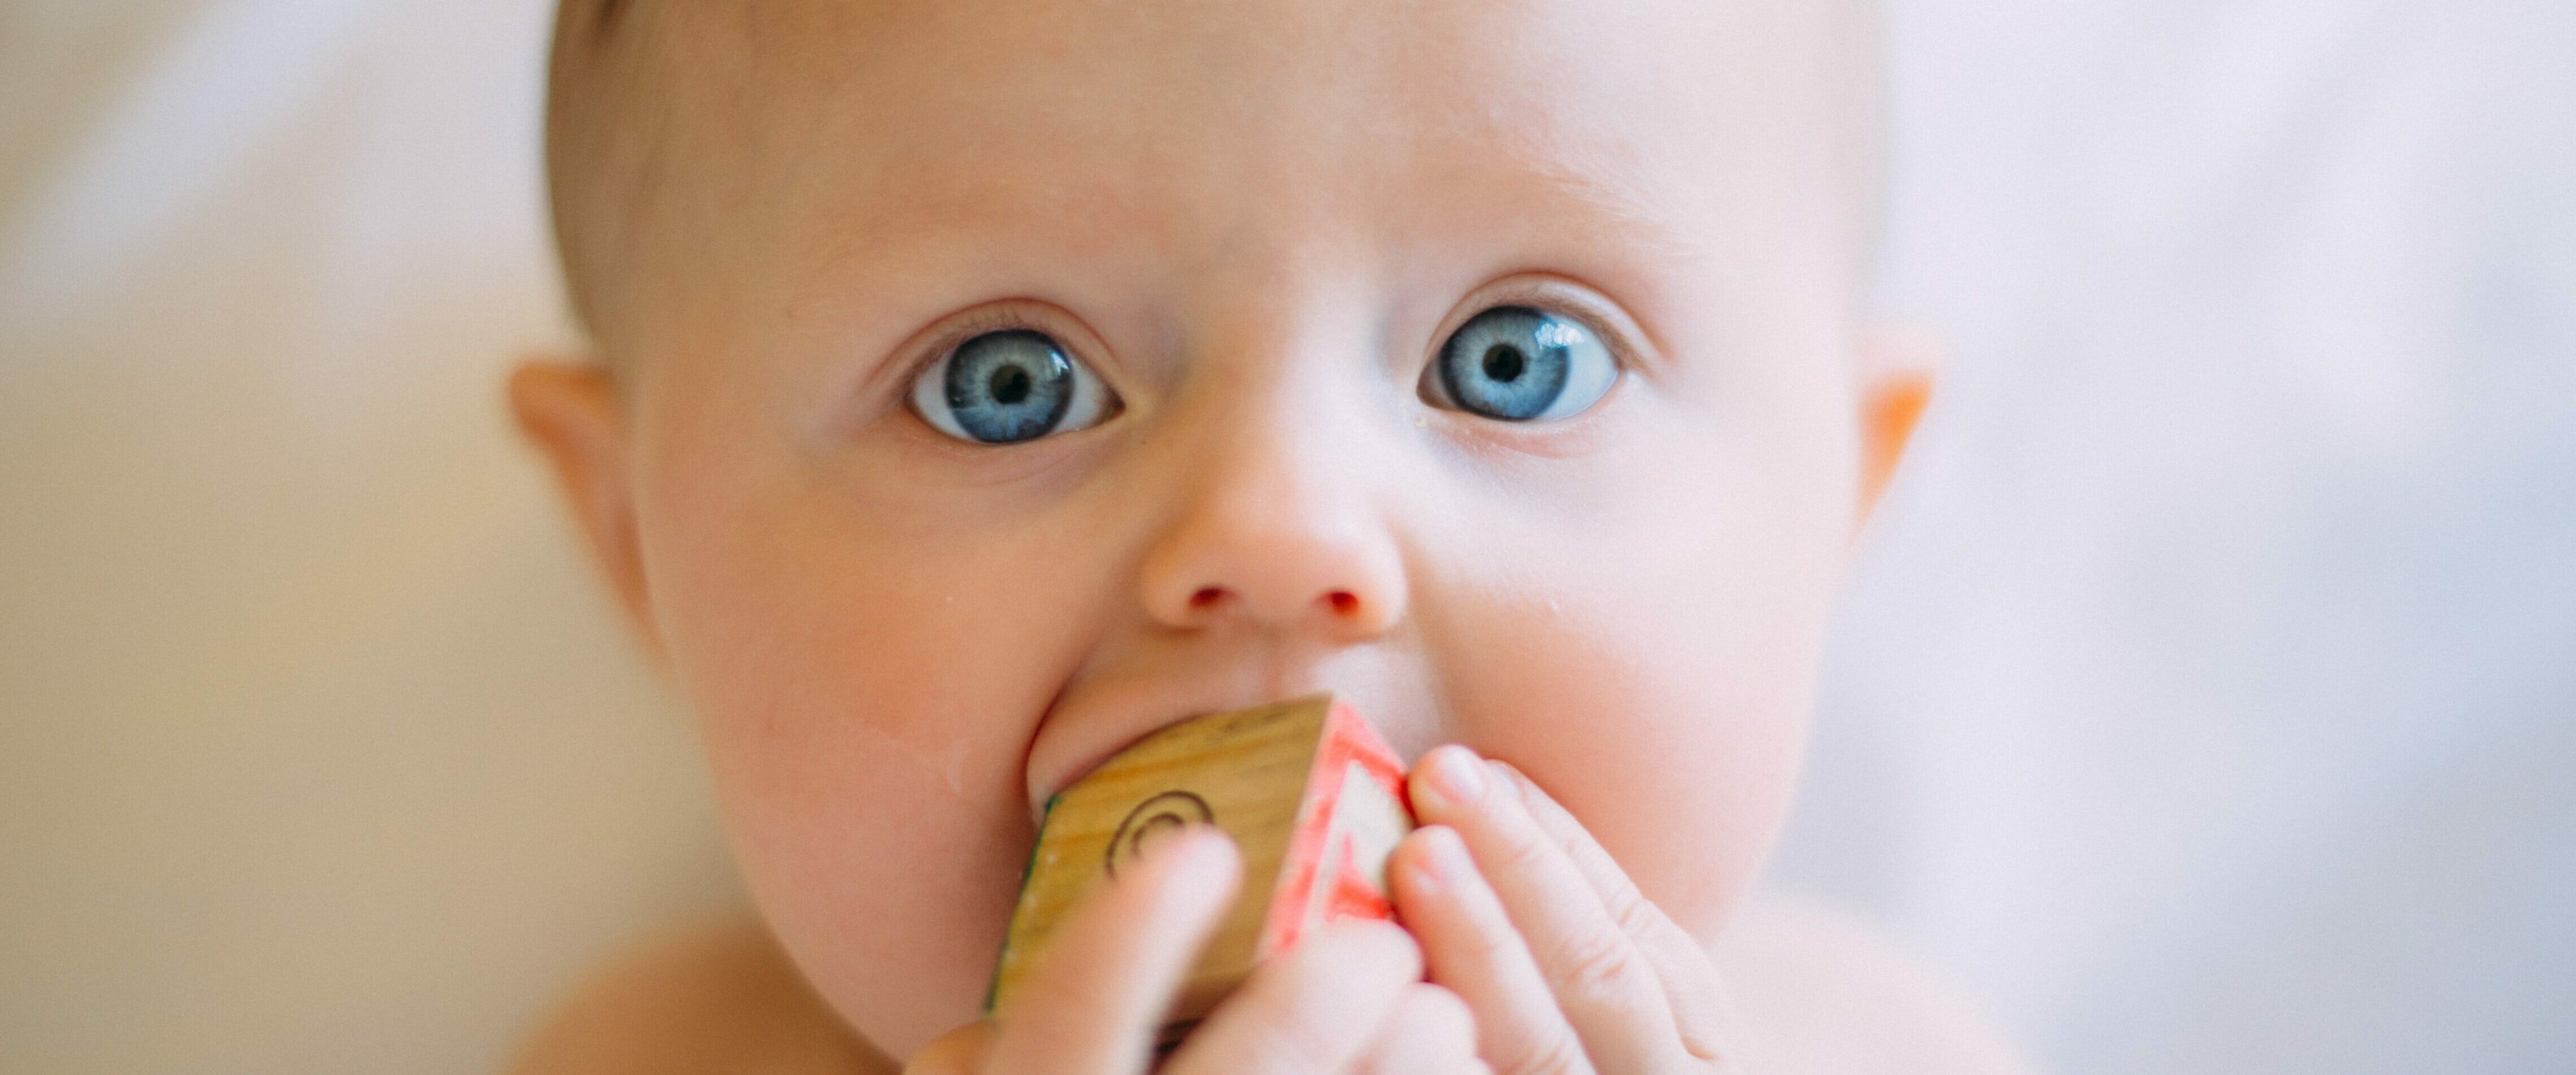 Peanut allergy can be prevented by giving babies peanut butter